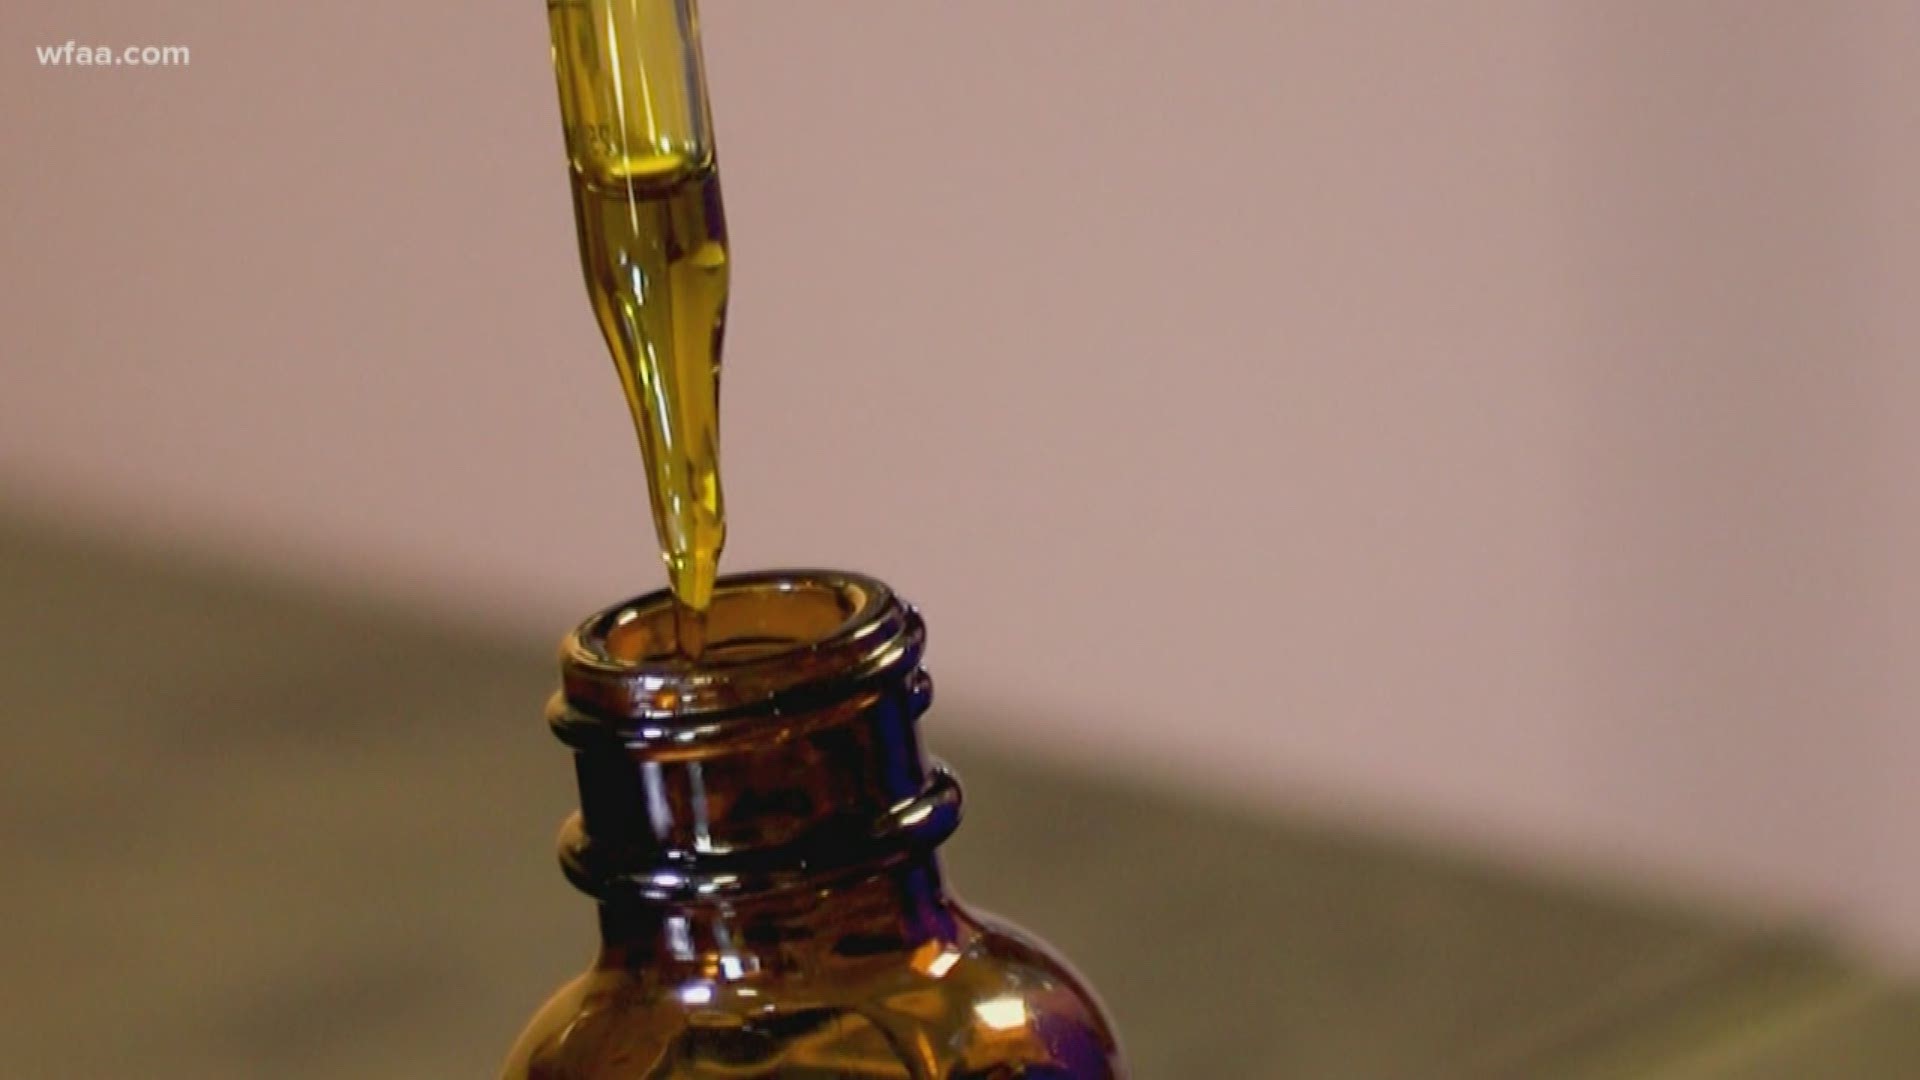 Price of relief: Texans turning to CBD oil